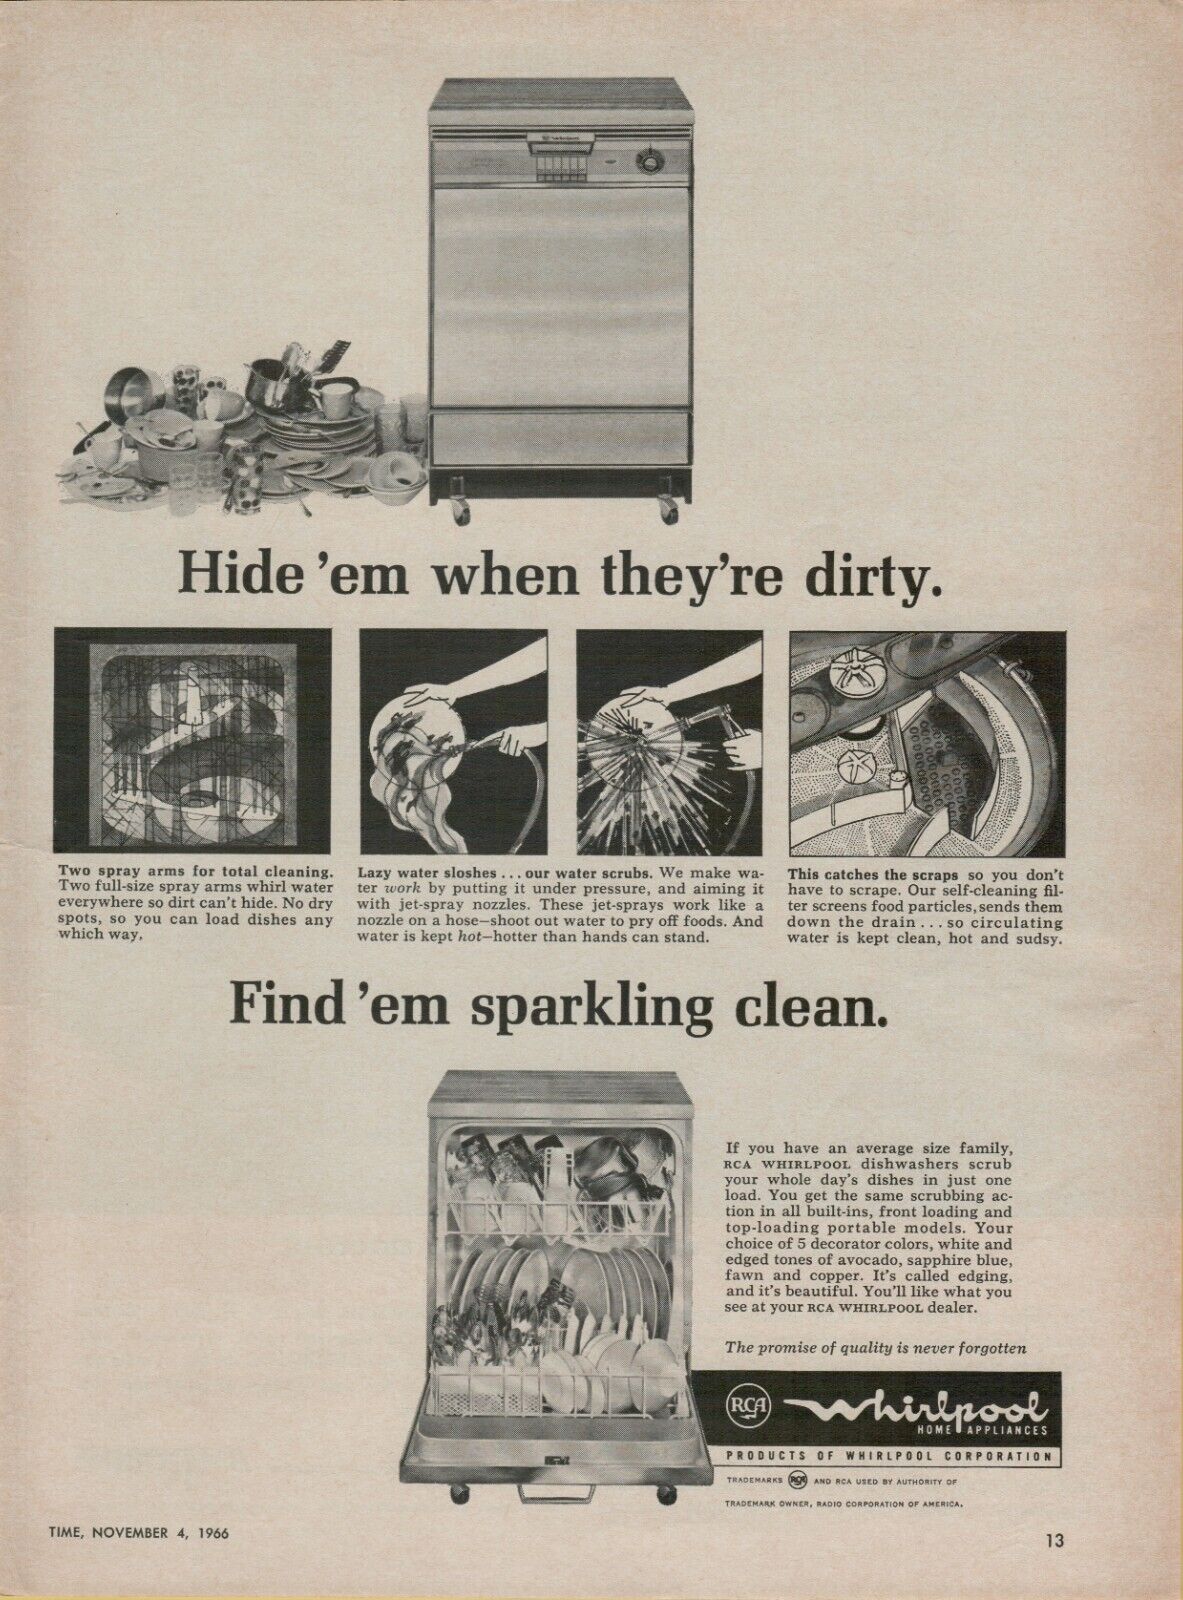 1966 Whirlpool Dishwasher Hide Them When They\'re Dirt Dishes VINTAGE PRINT AD